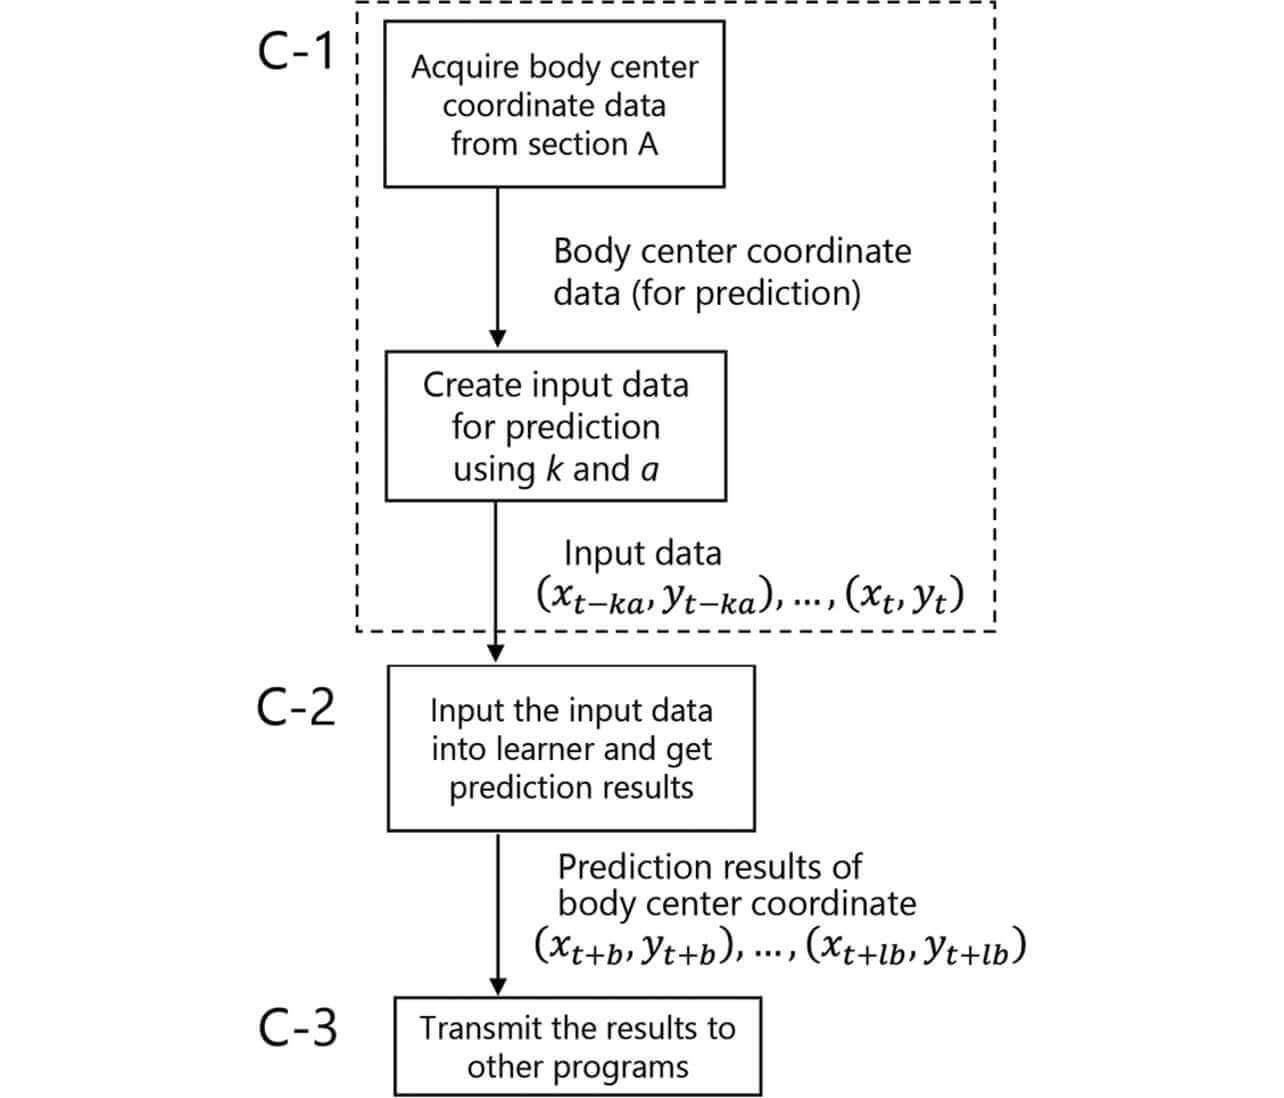 Fig. 7 Section C Prediction Processing Details